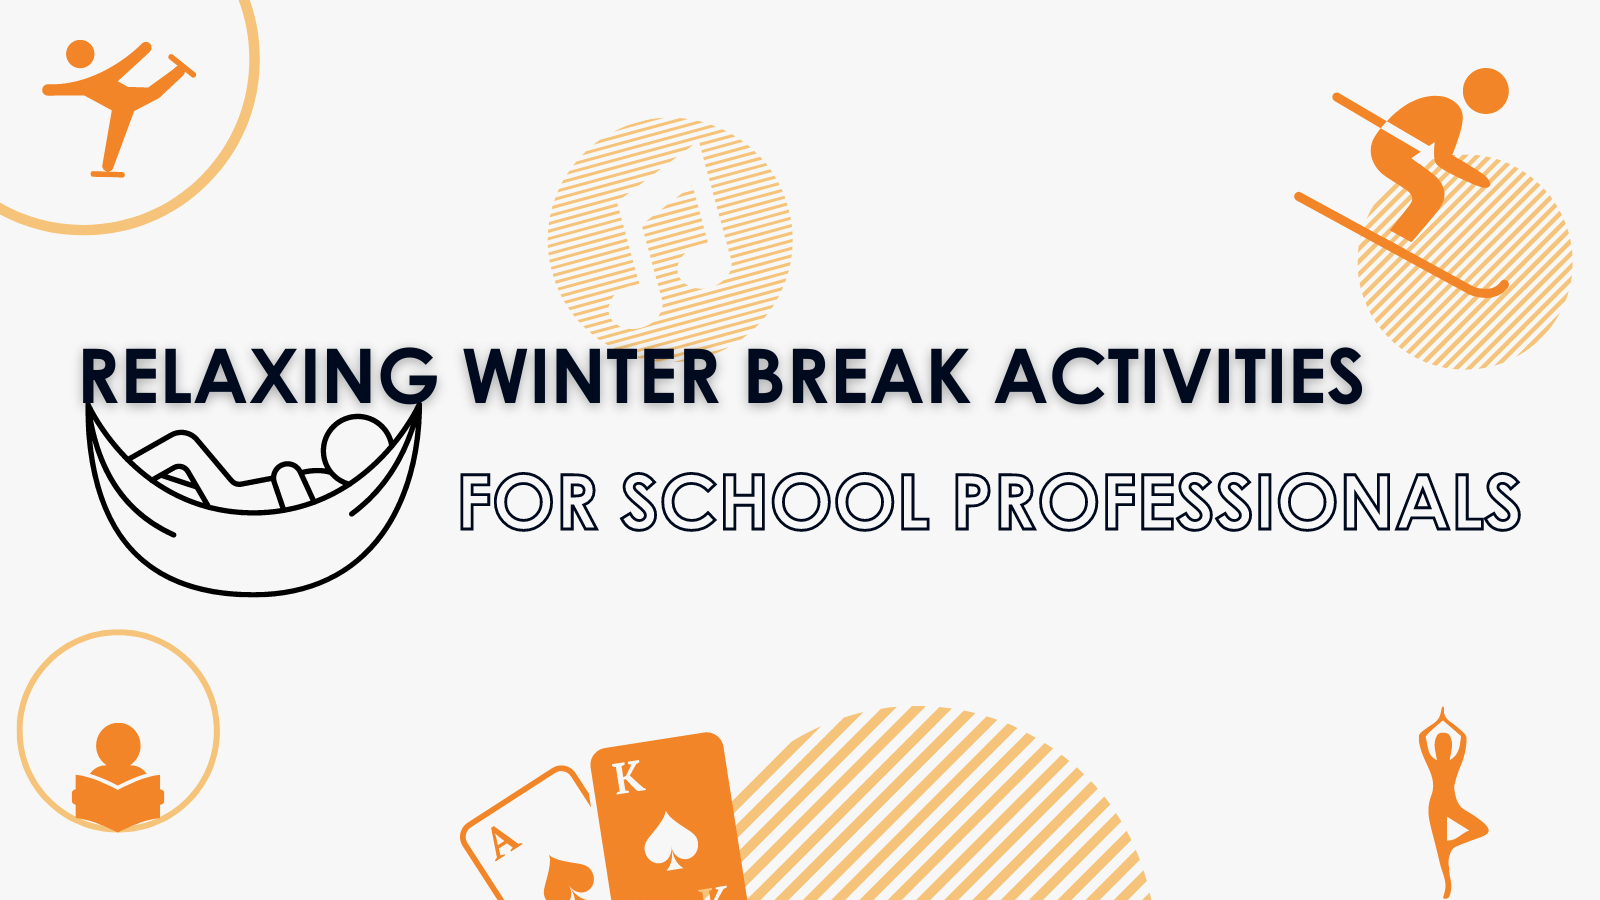 December is synonymous with holidays, family time, and a well-deserved break. Check out these relaxing winter break activities that our team came up with.